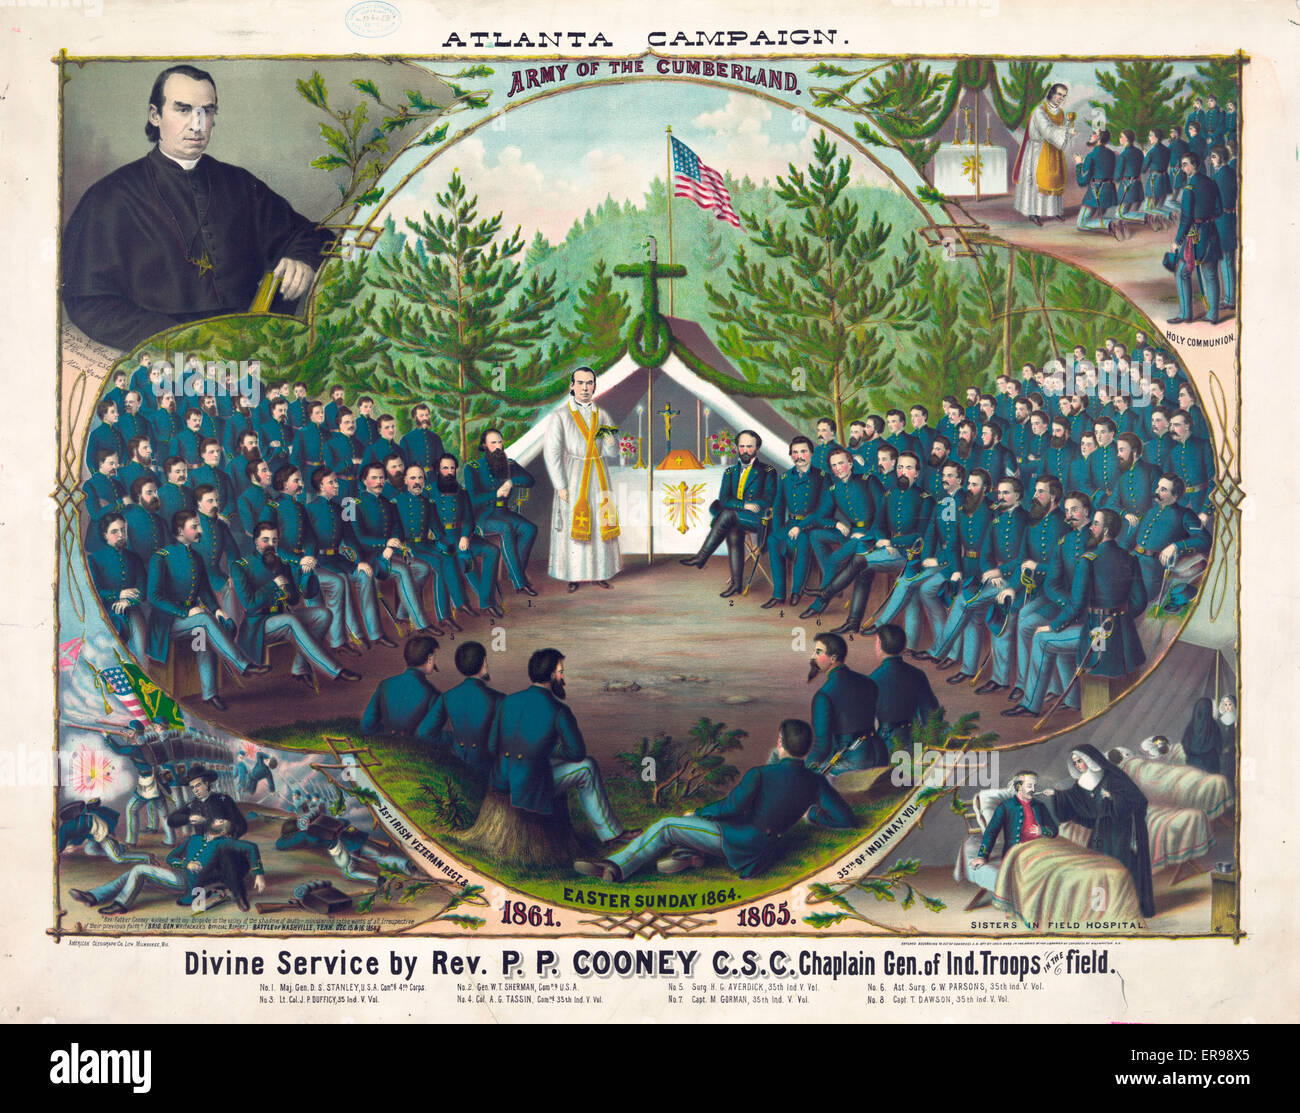 Atlanta campaign. Army of the Cumberland. Divine service by Stock Photo